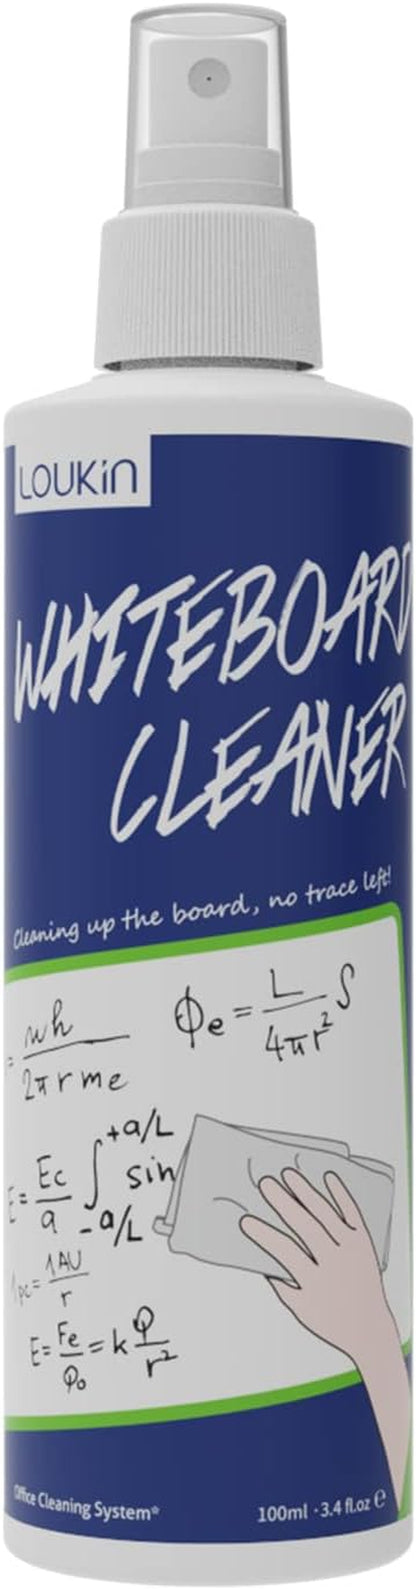 Non-Toxic Whiteboard Cleaner, 8.5 Fl Oz Dry Erase Board Cleaner, Low-Odor Whiteboard Cleaning Spray with Cloth, Removes Stubborn Marks from Whiteboards